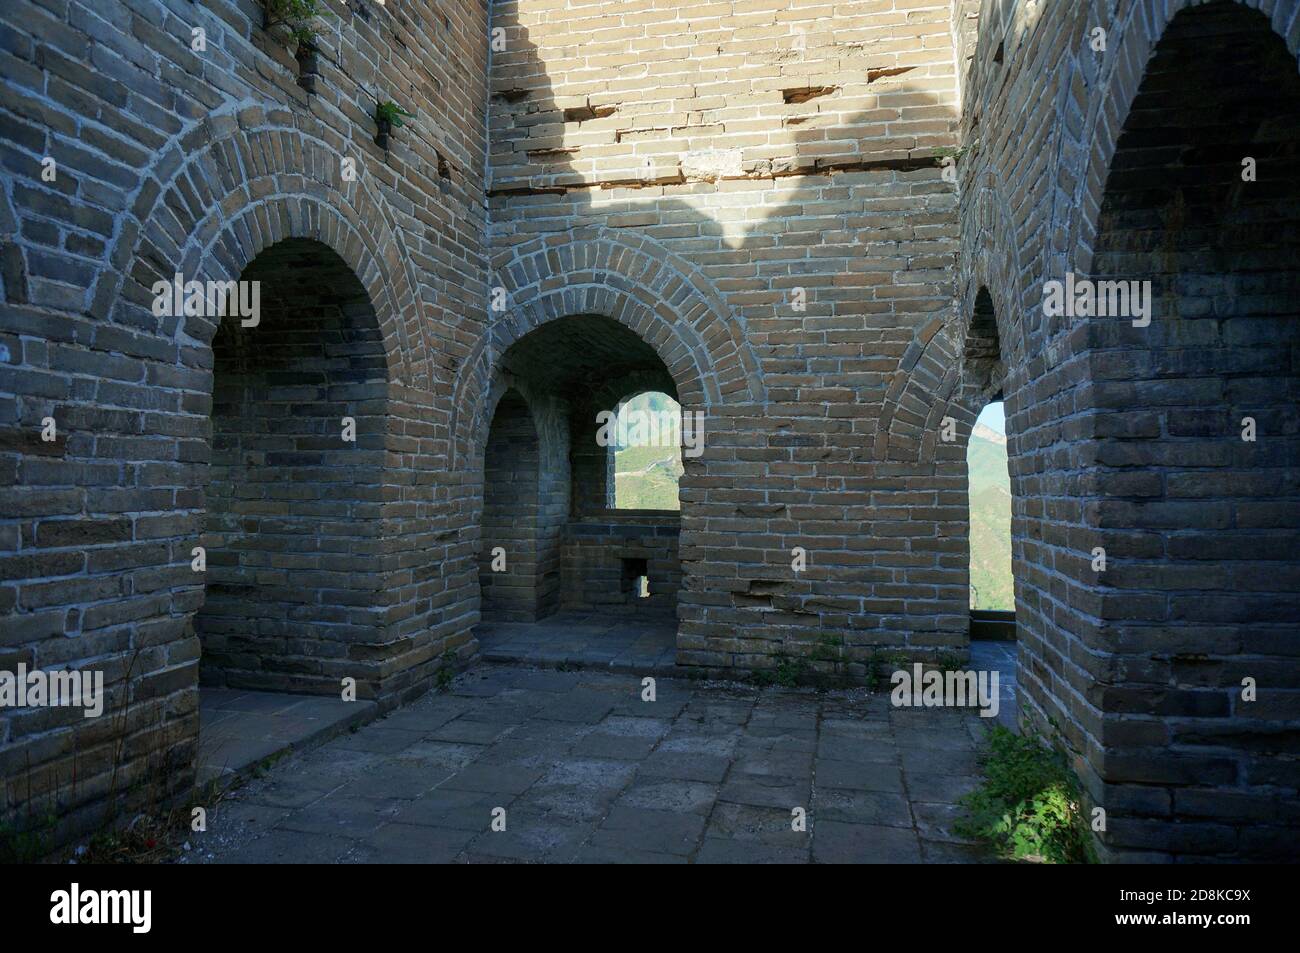 Fort of the Wall of China. Inside of the old bastion. Entrance arches Stock Photo